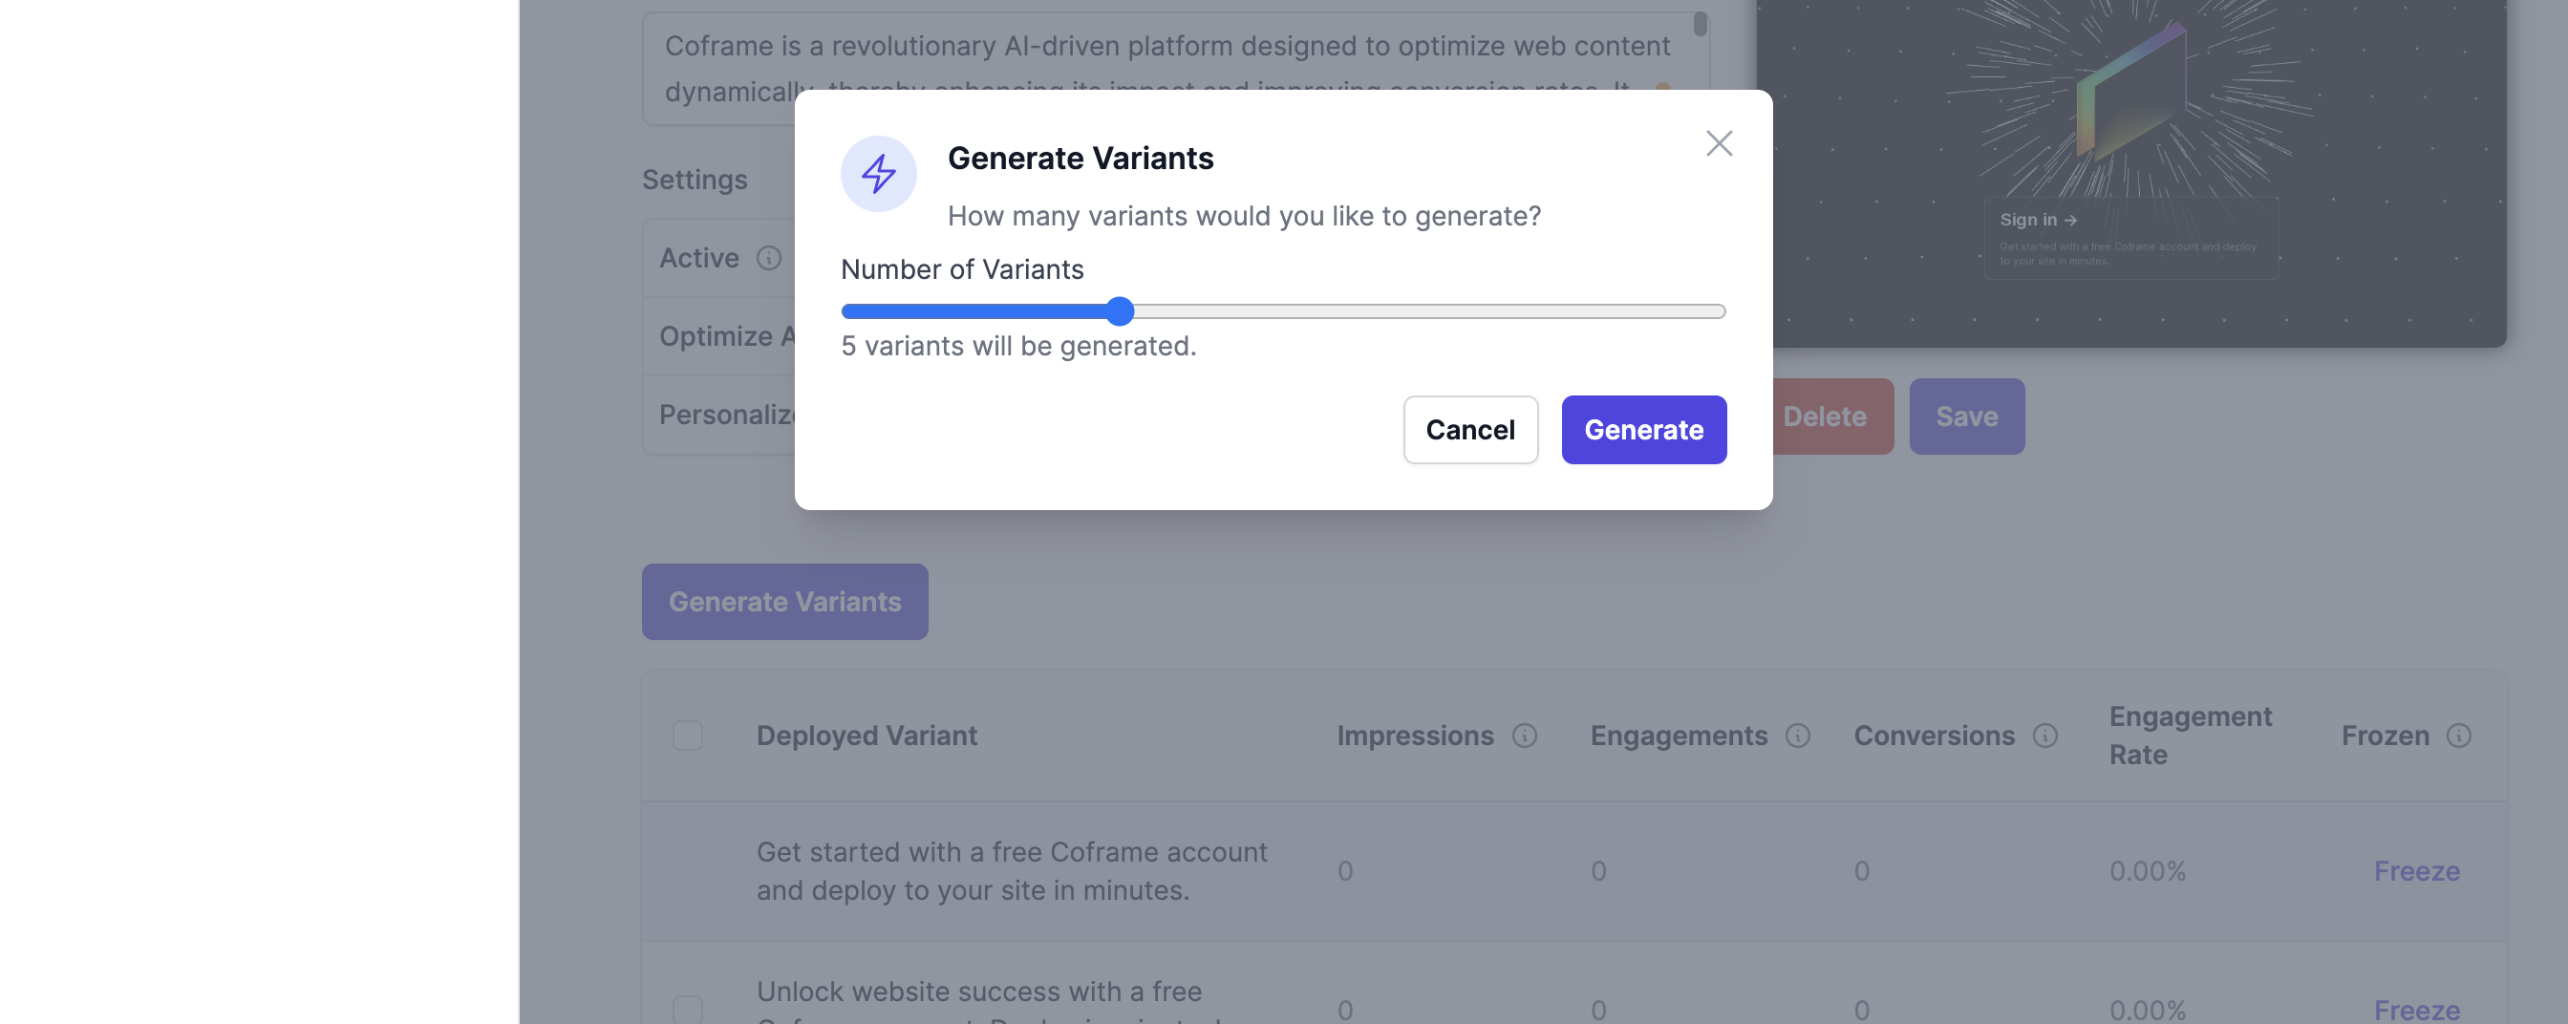 After clicking the "Generate Variants" button, select how many variants you want generated and click "Generate".